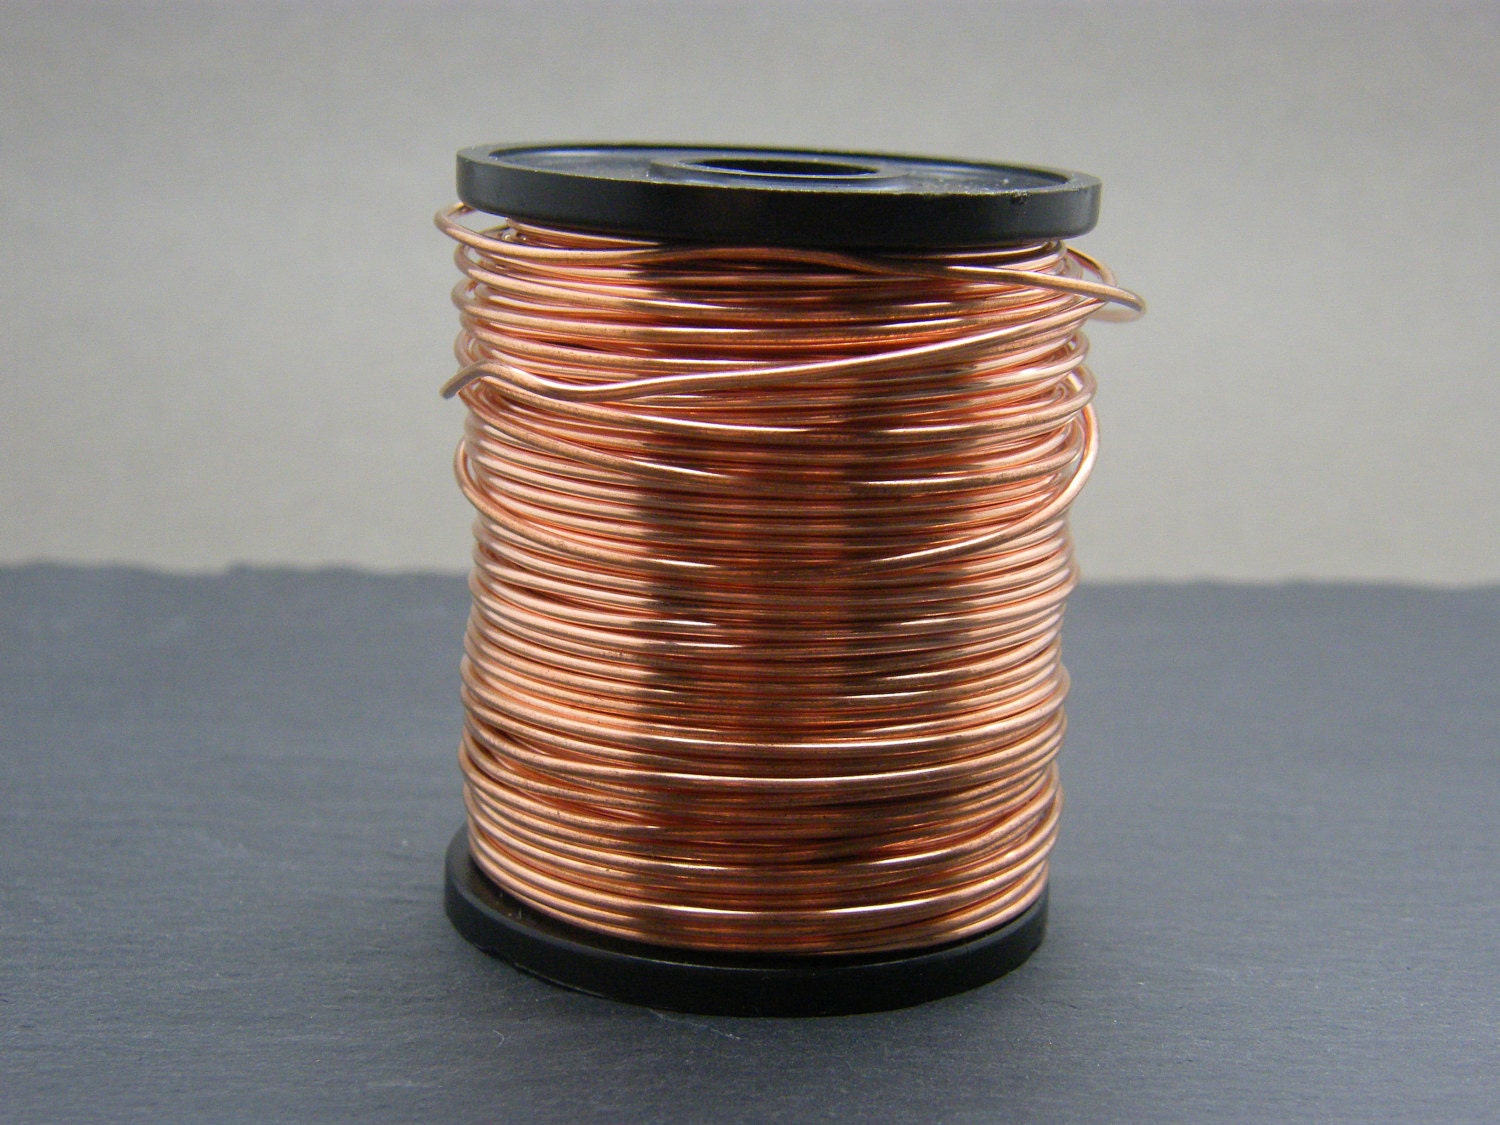 Copper Wire 0.8mm Gauge Bare Copper Wire Antique Copper Jewellery Wire 20g  Copper Jewellery Supplies Wire Wrapping Jewelry Wire 